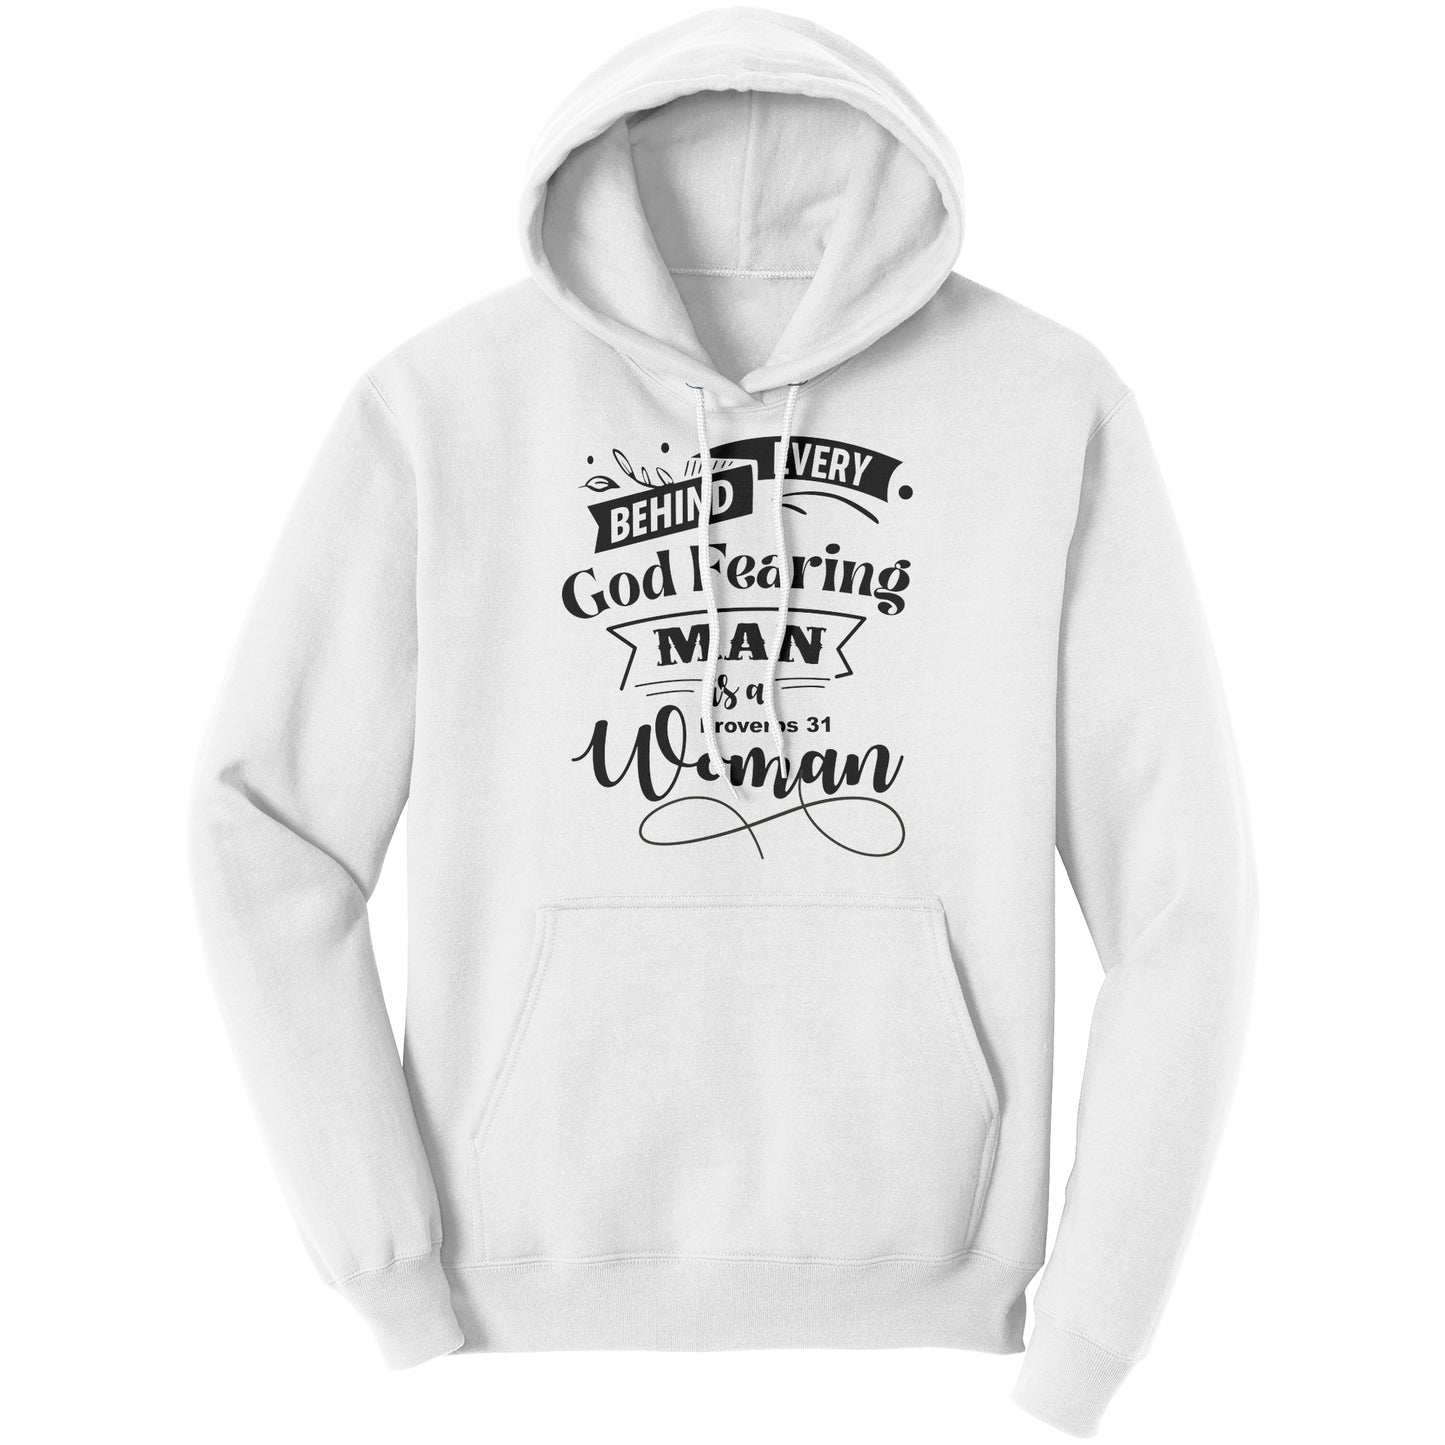 Behind Every God Fearing Man is a Proverbs 31 Woman Hoodie Part 1